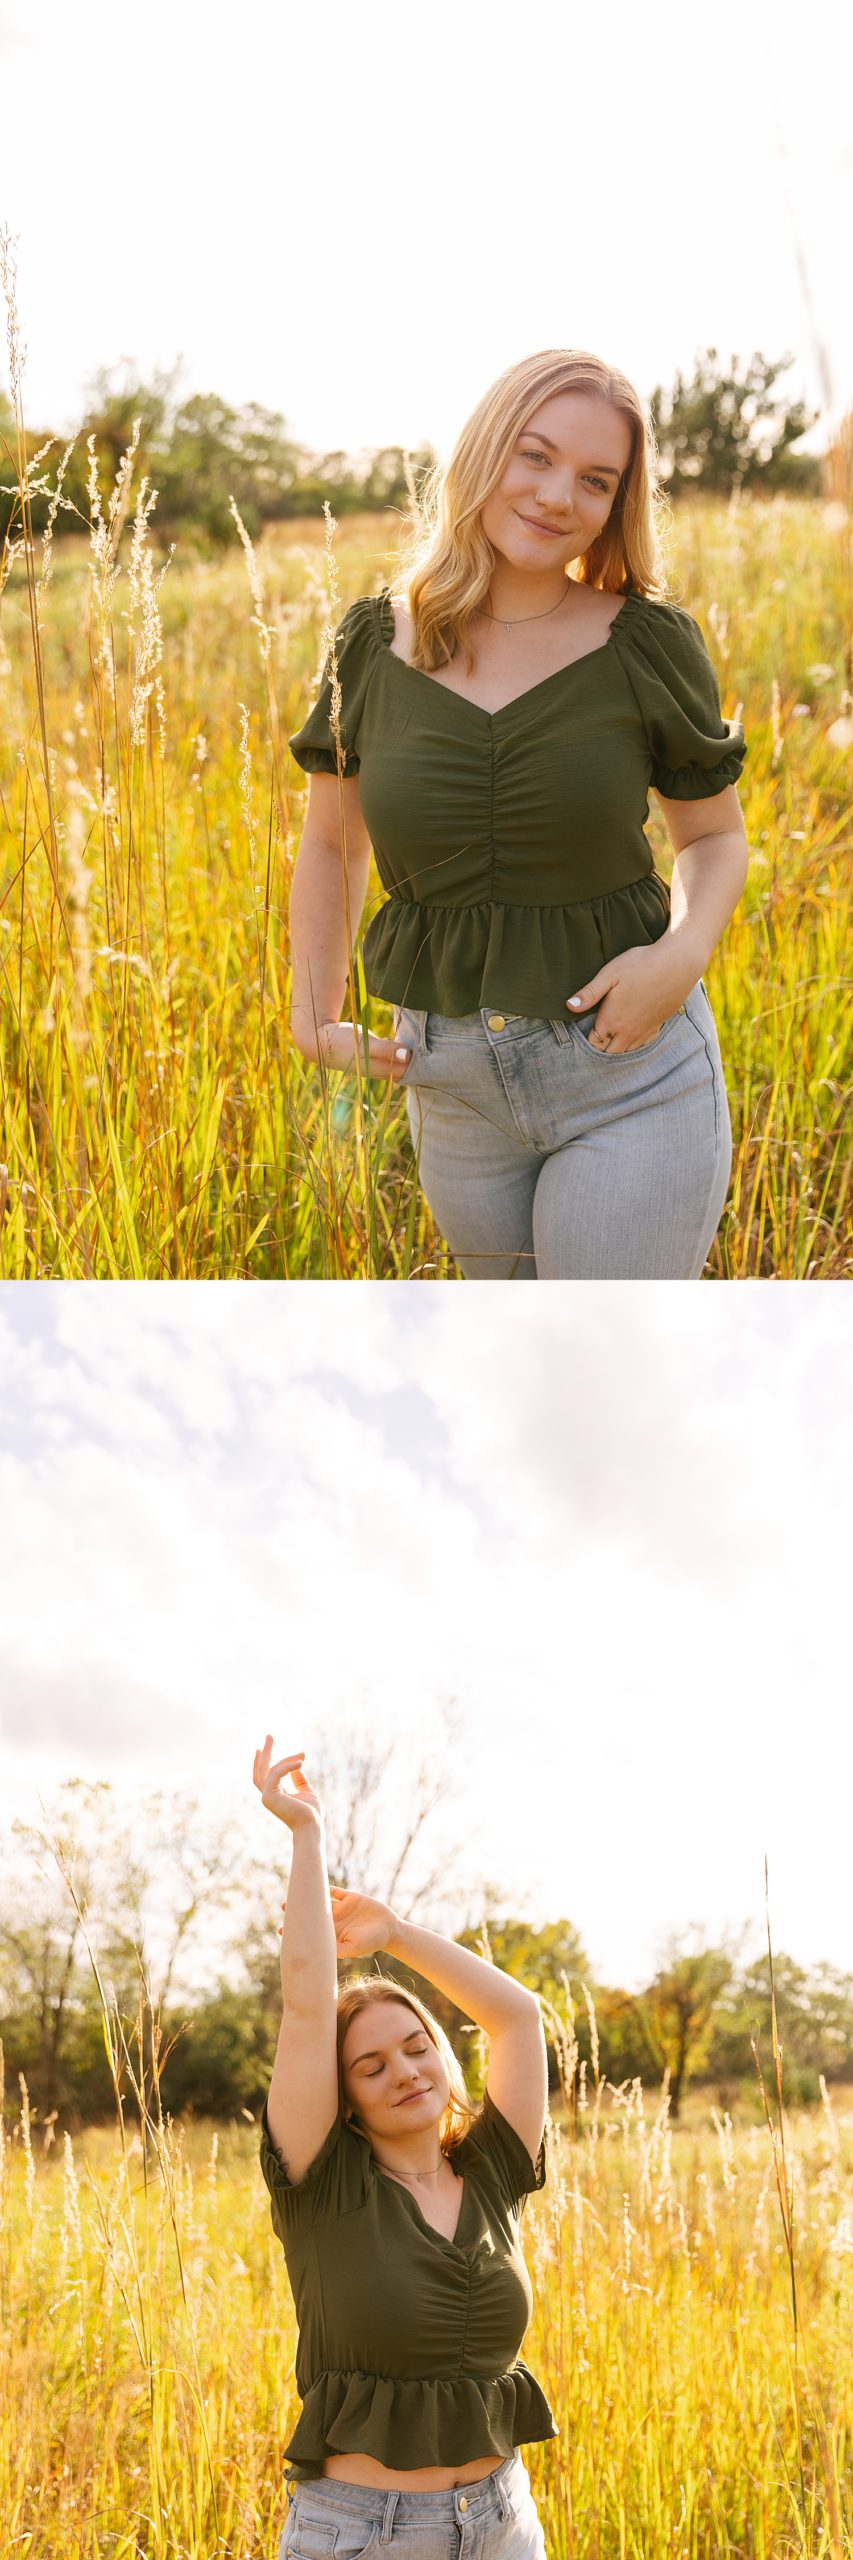 Senior girl standing in grass field during sunset wearing short sleeve shirt and jeans 